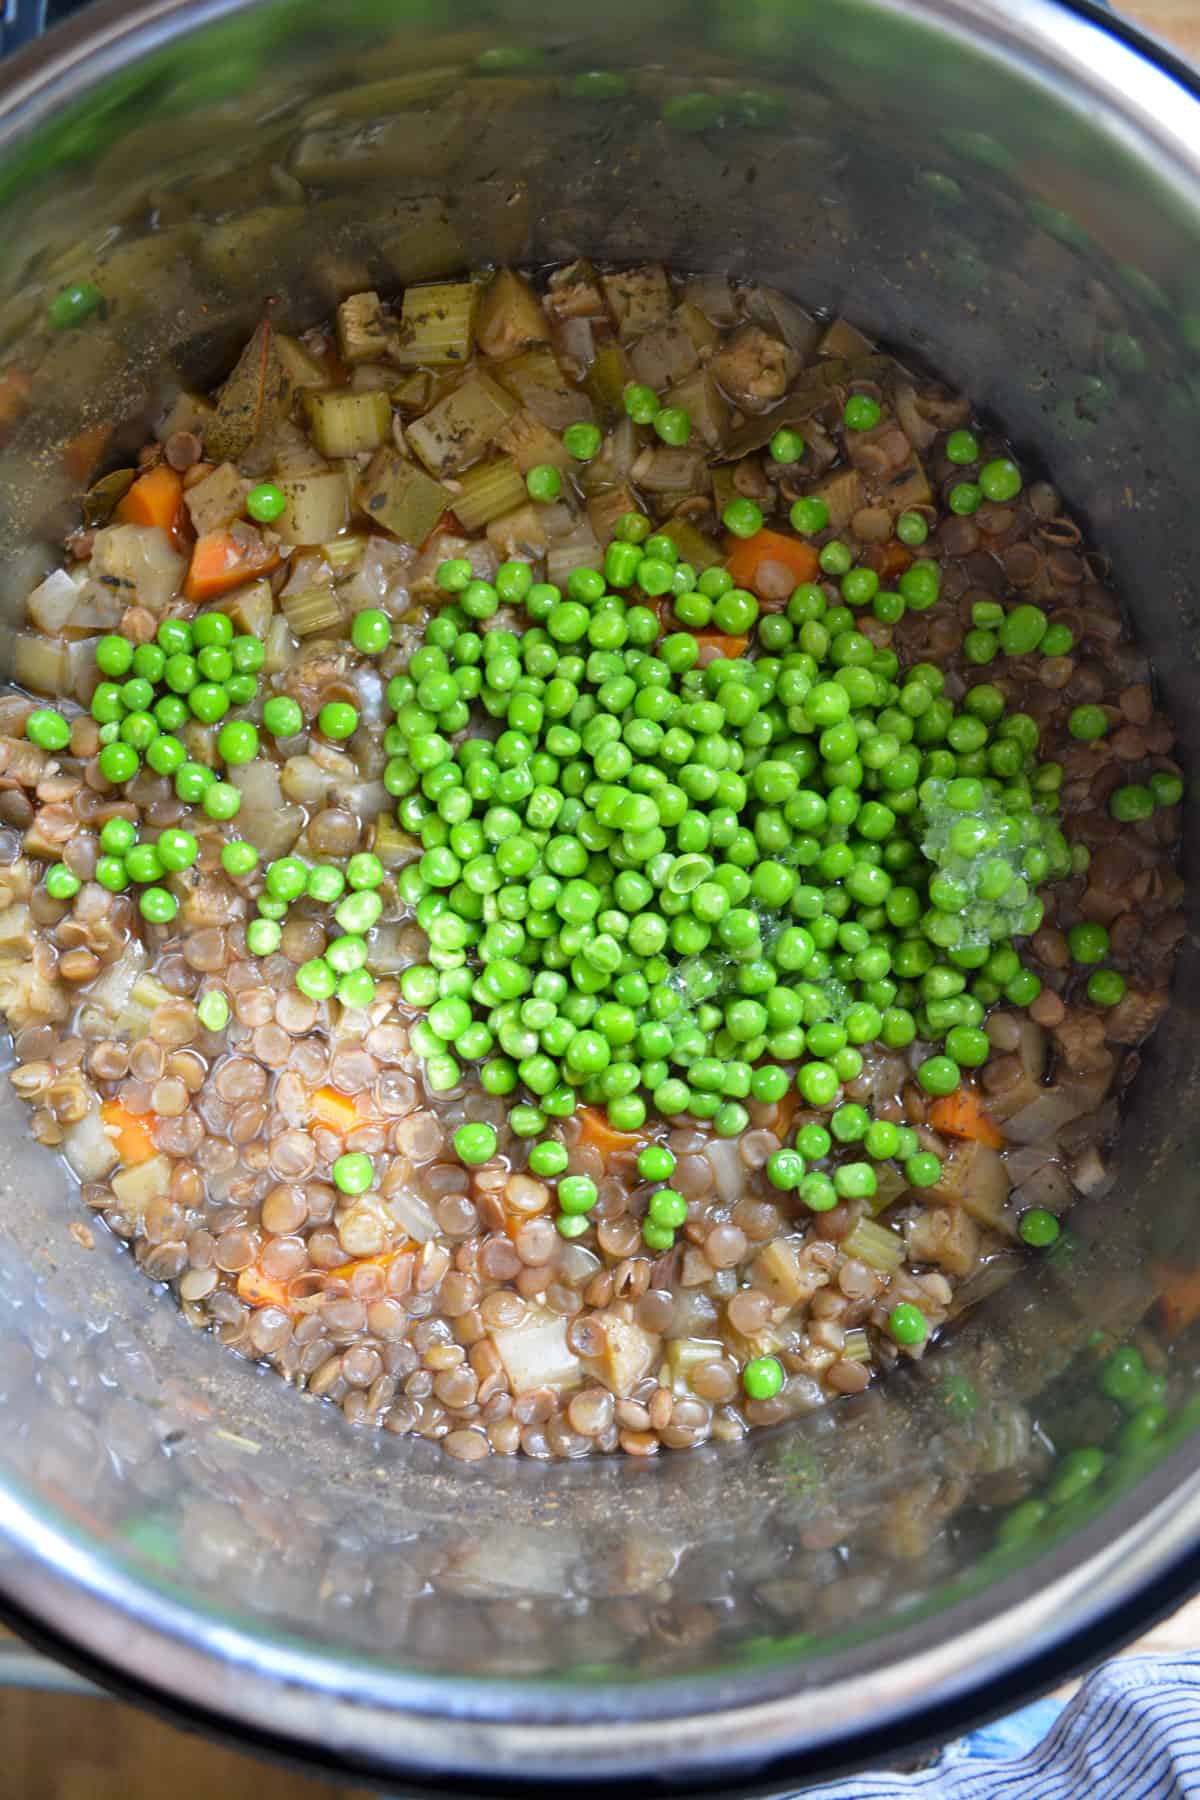 Peas added into the instant pot lentil stew